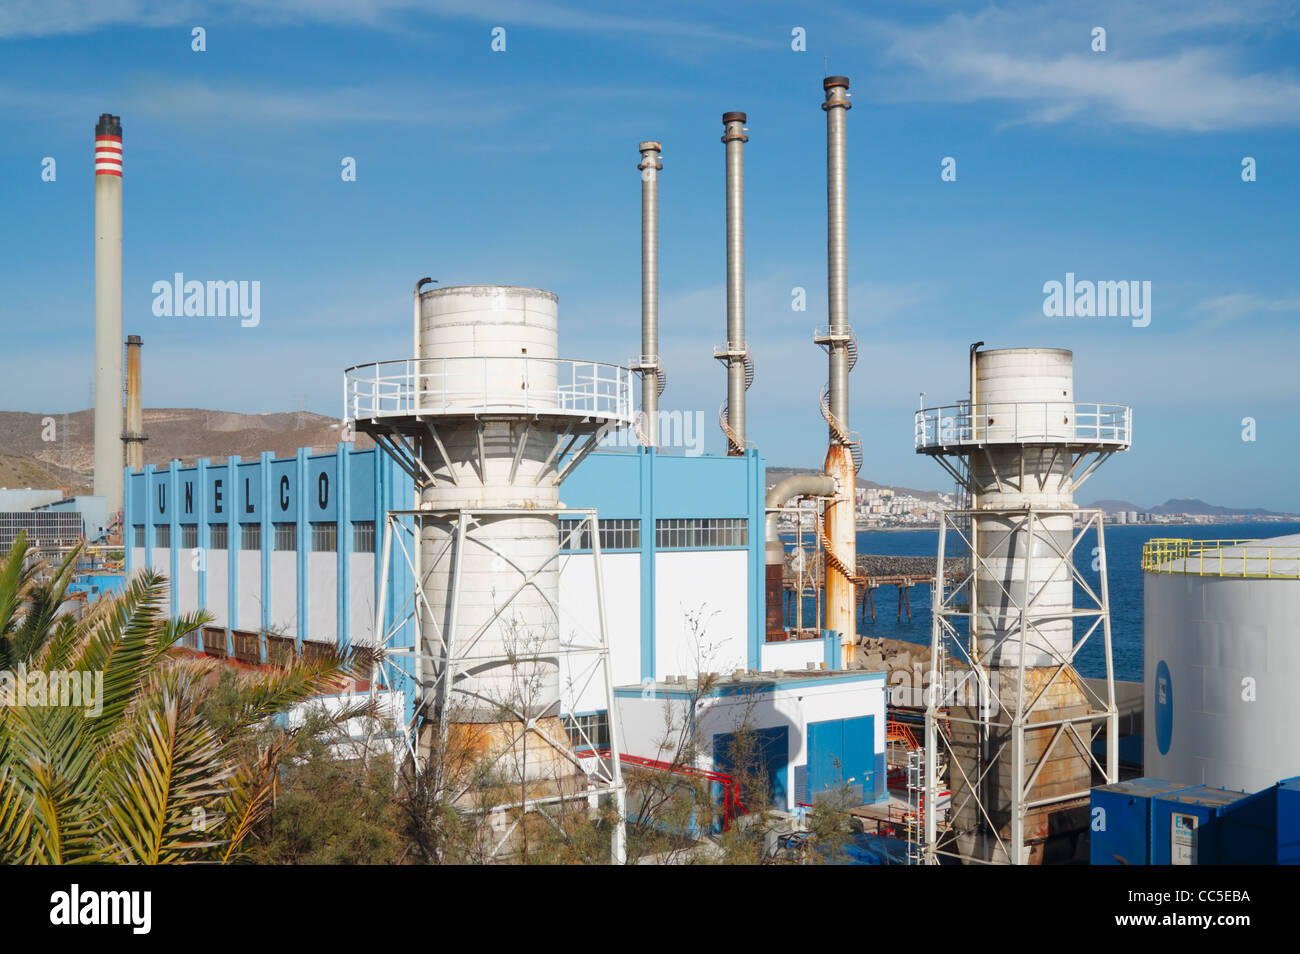 Unelco (Endesa) electricity power station at Jinamar on the outskirts of  Las Palmas, Gran Canaria, Canary Islands, Spain Stock Photo - Alamy